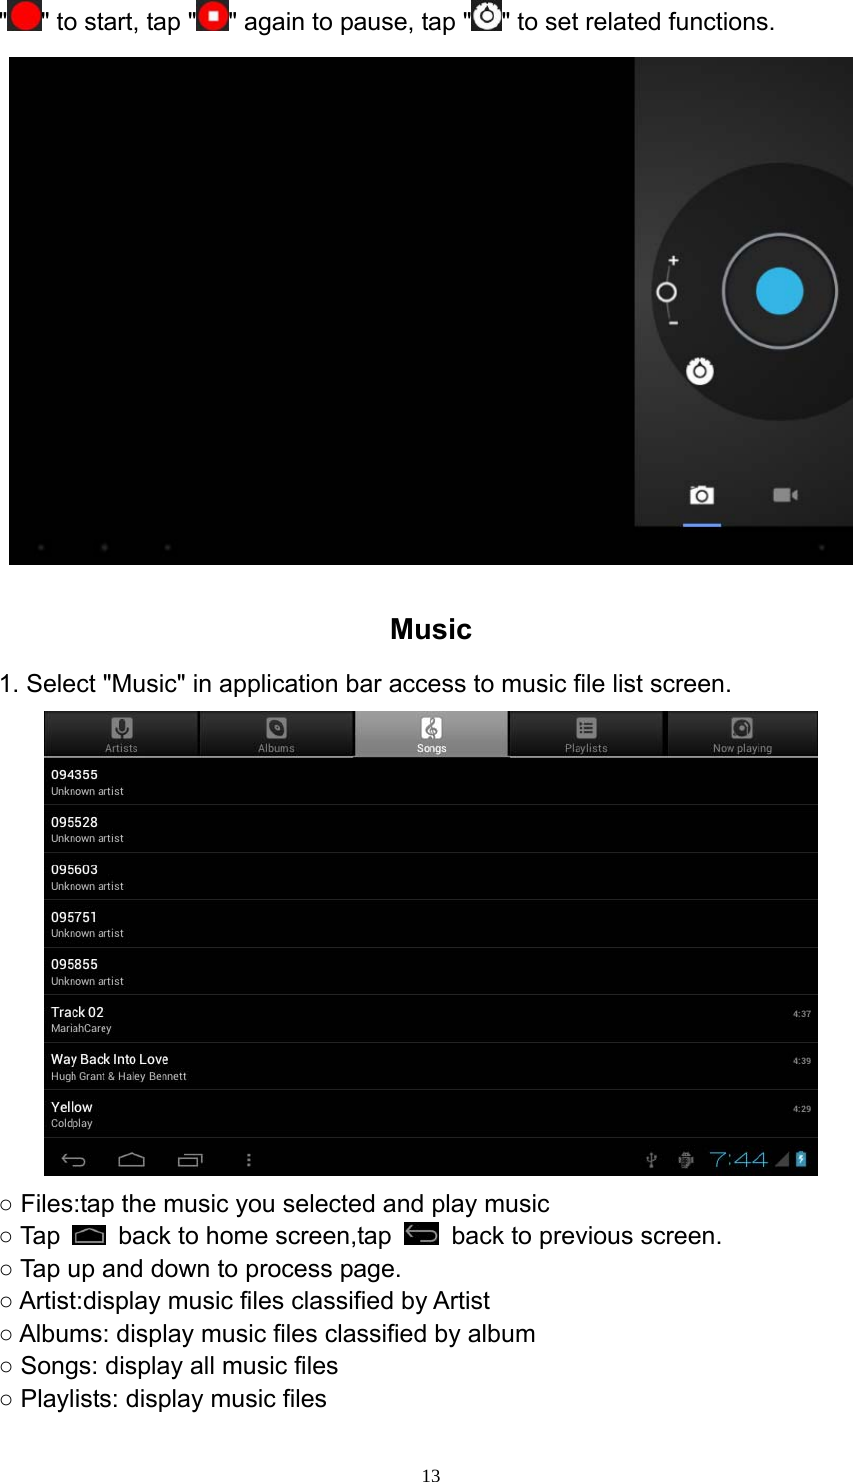  13&quot;&quot; to start, tap &quot; &quot; again to pause, tap &quot; &quot; to set related functions.  Music 1. Select &quot;Music&quot; in application bar access to music file list screen.  ○ Files:tap the music you selected and play music ○ Tap    back to home screen,tap    back to previous screen. ○ Tap up and down to process page. ○ Artist:display music files classified by Artist   ○ Albums: display music files classified by album ○ Songs: display all music files ○ Playlists: display music files 